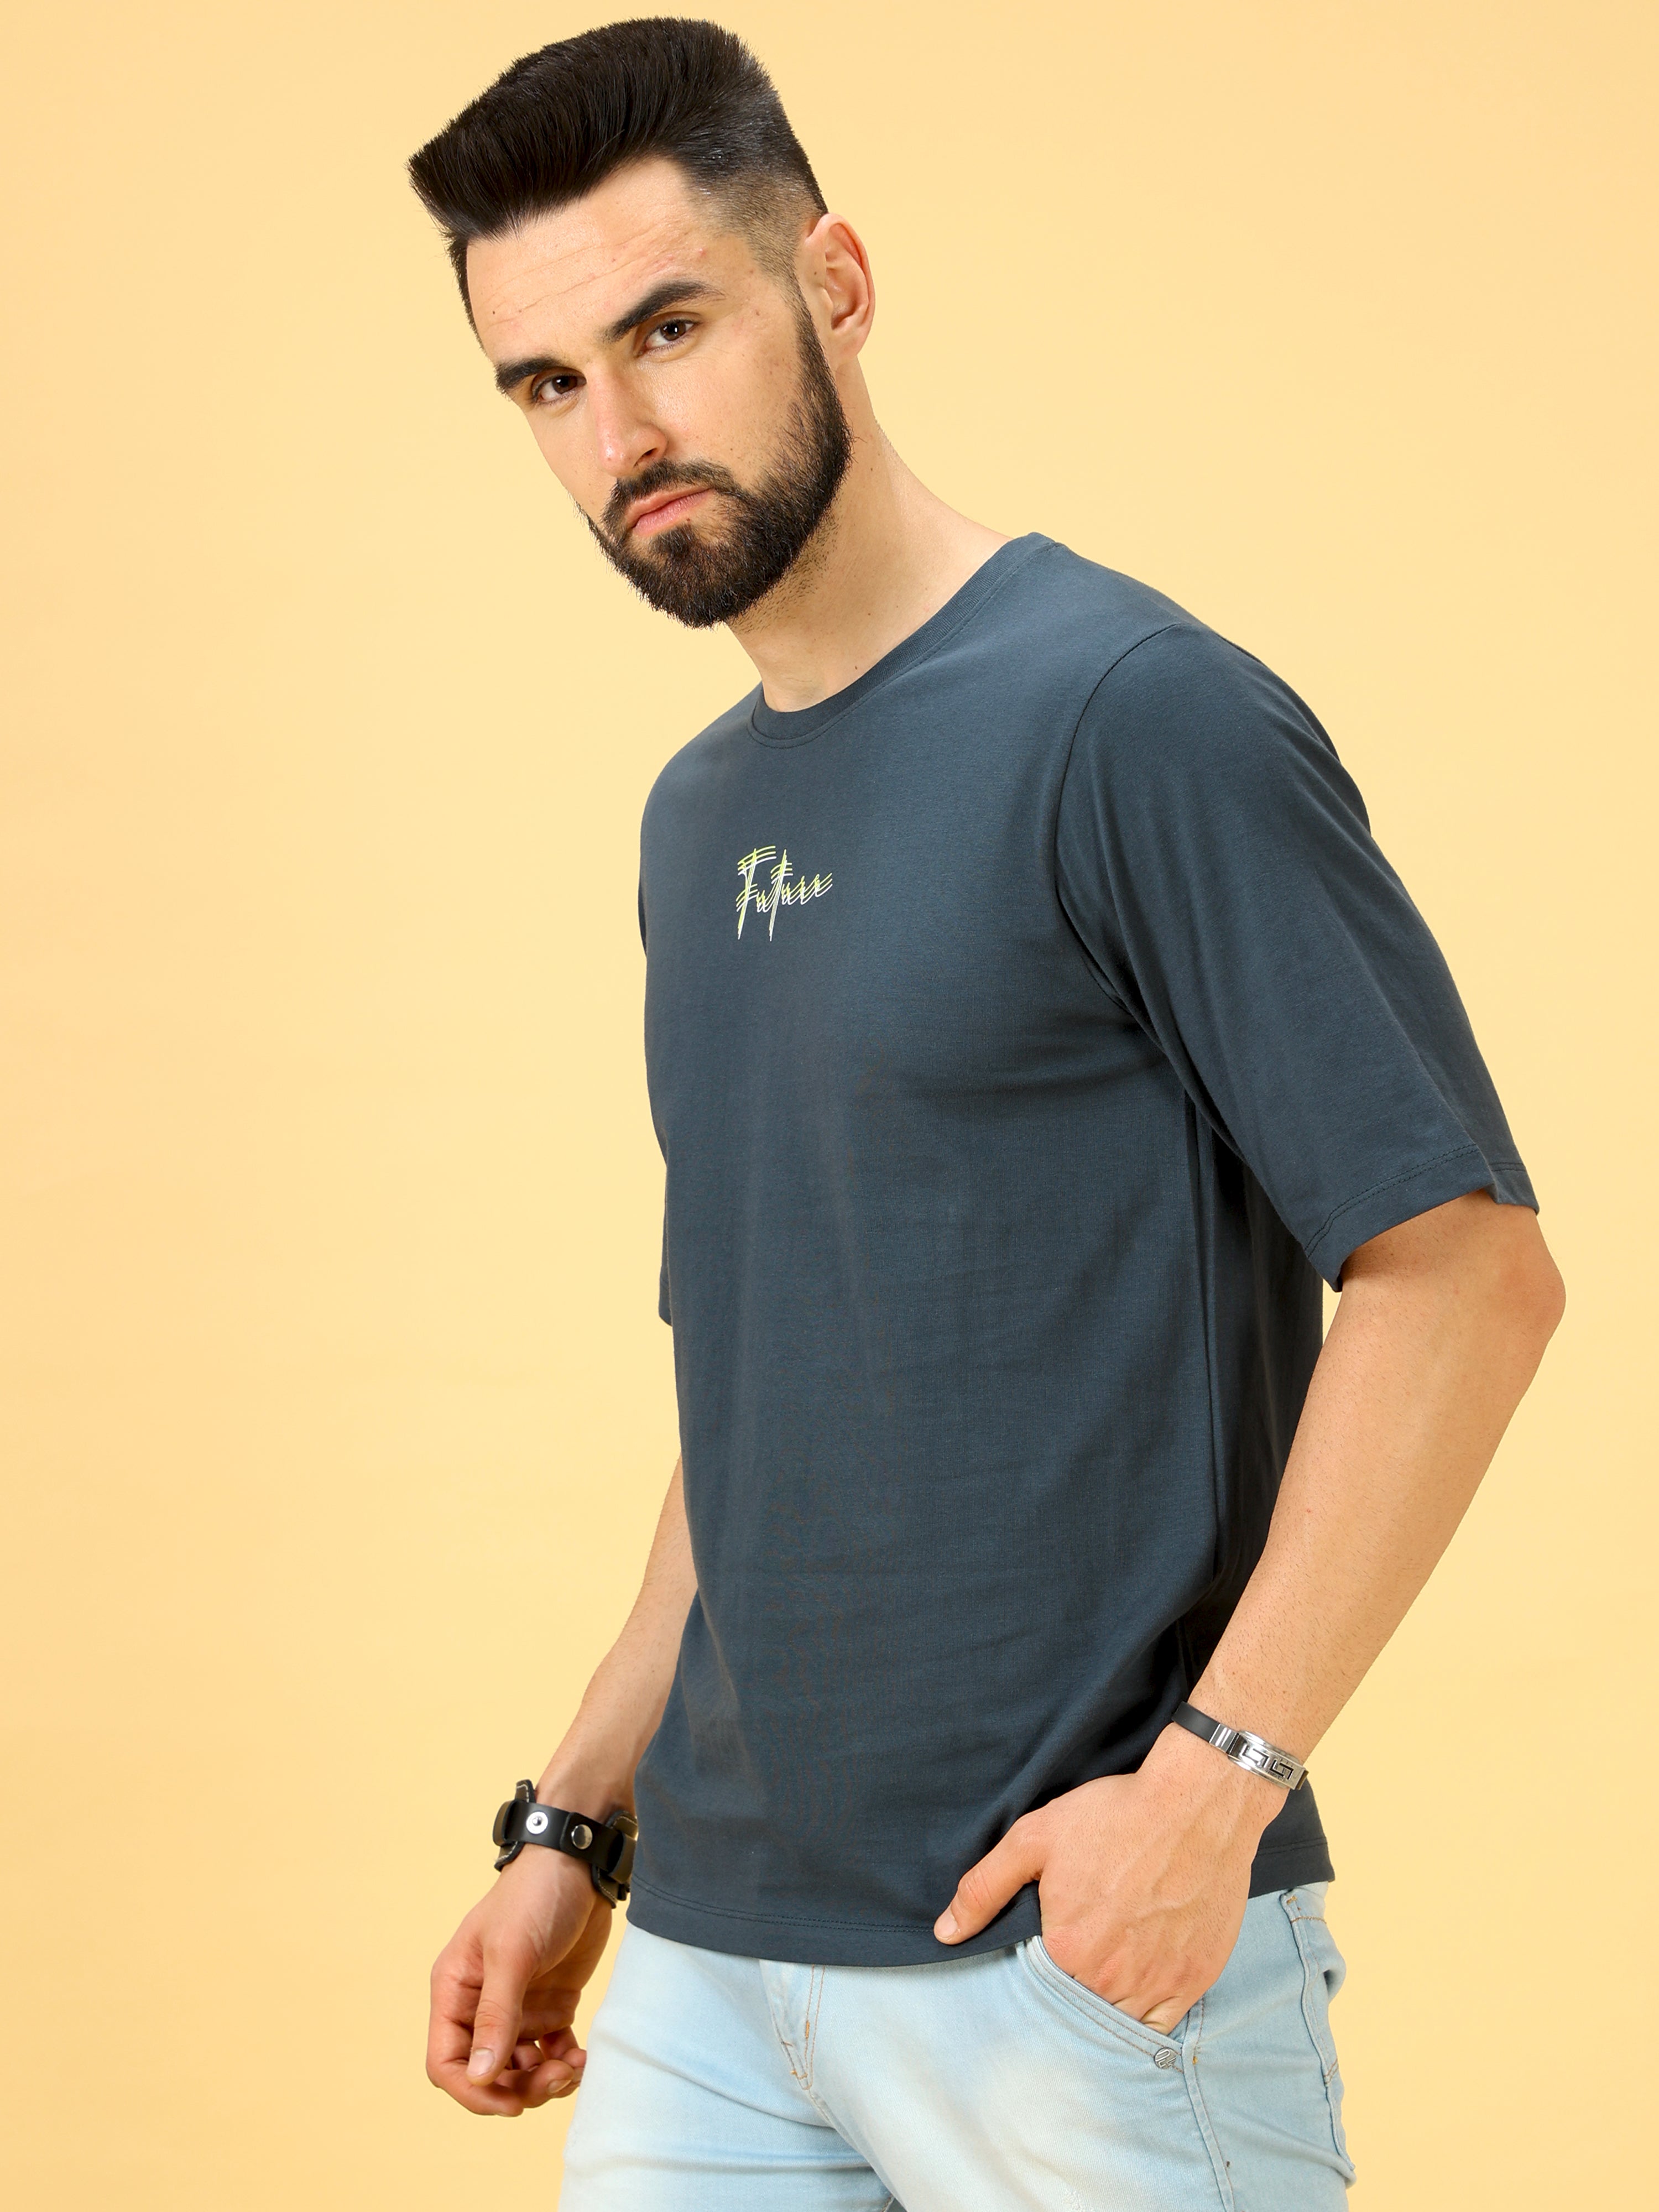 Future Chest Print Fly Sleeve Crew Neck T-Shirt shop online at Estilocus. This pure cotton printed T-shirt is a stylish go-to for laidback days. Cut in a comfy oversized fit. • 100% Cotton knitted interlock 190GSM• Bio washed fabric• Round neck T-shirt •